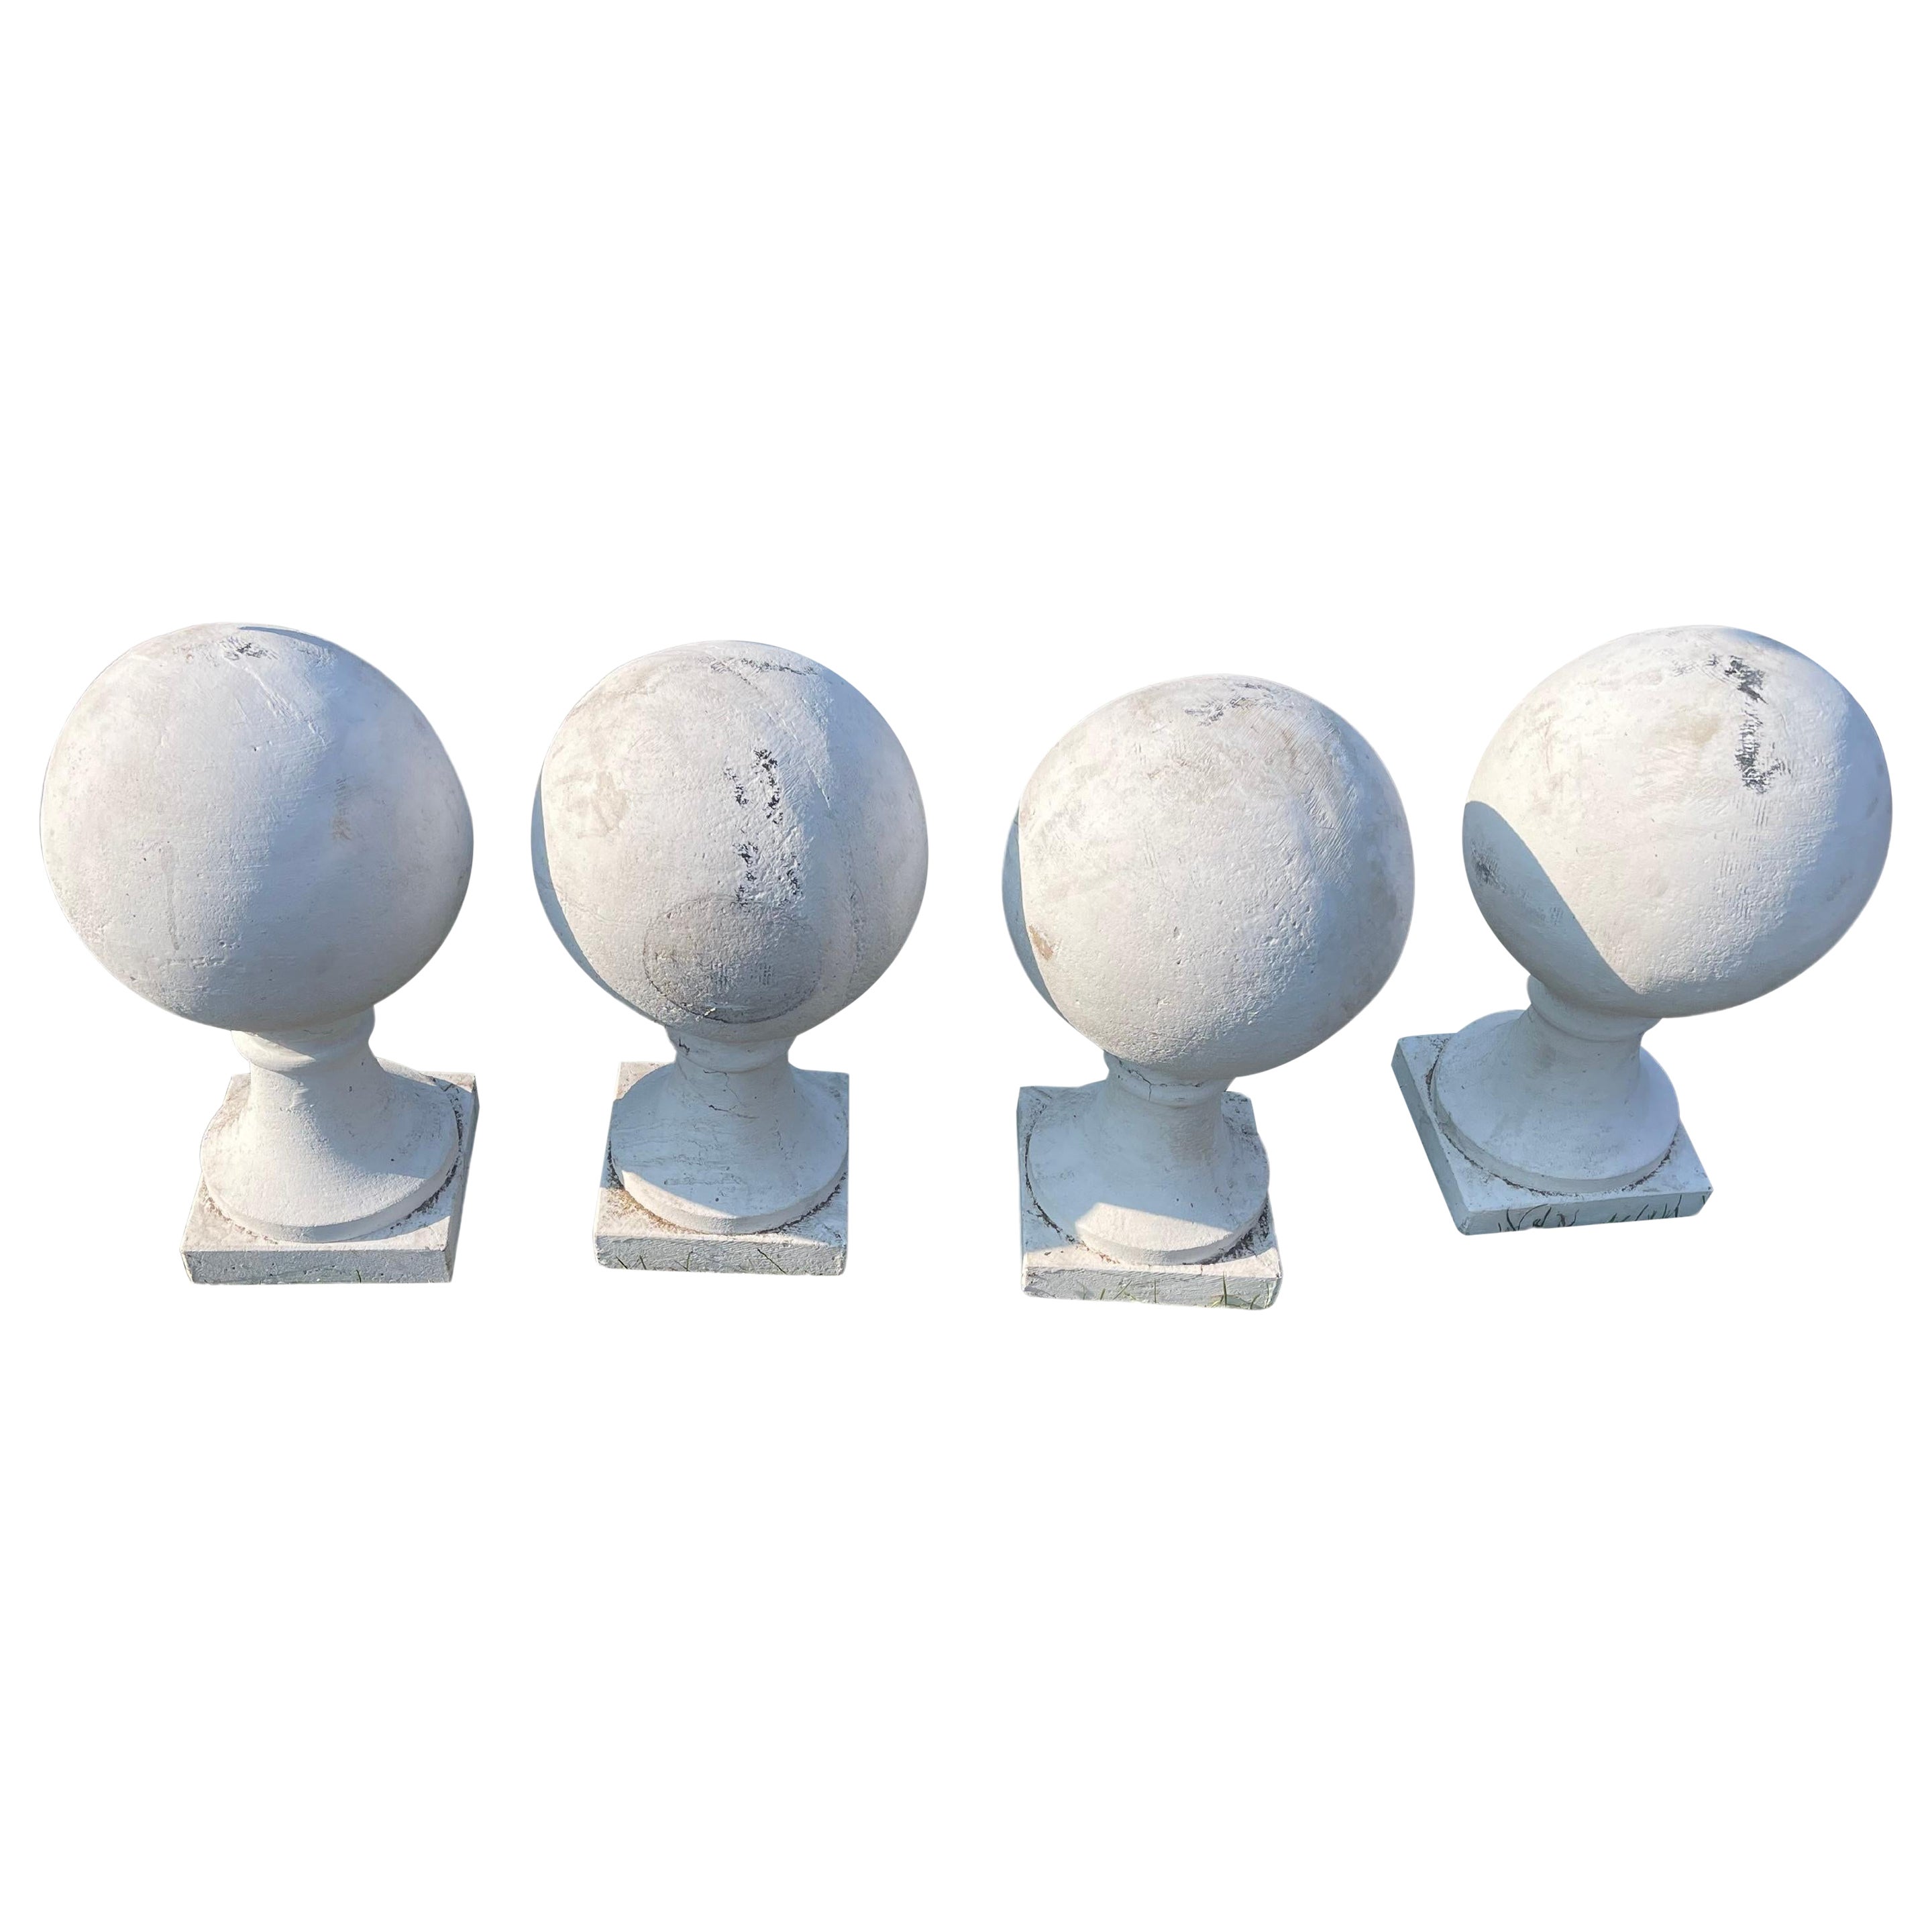 Four Classic White Cement Ball Finials on Square Base from a North Shore Estate